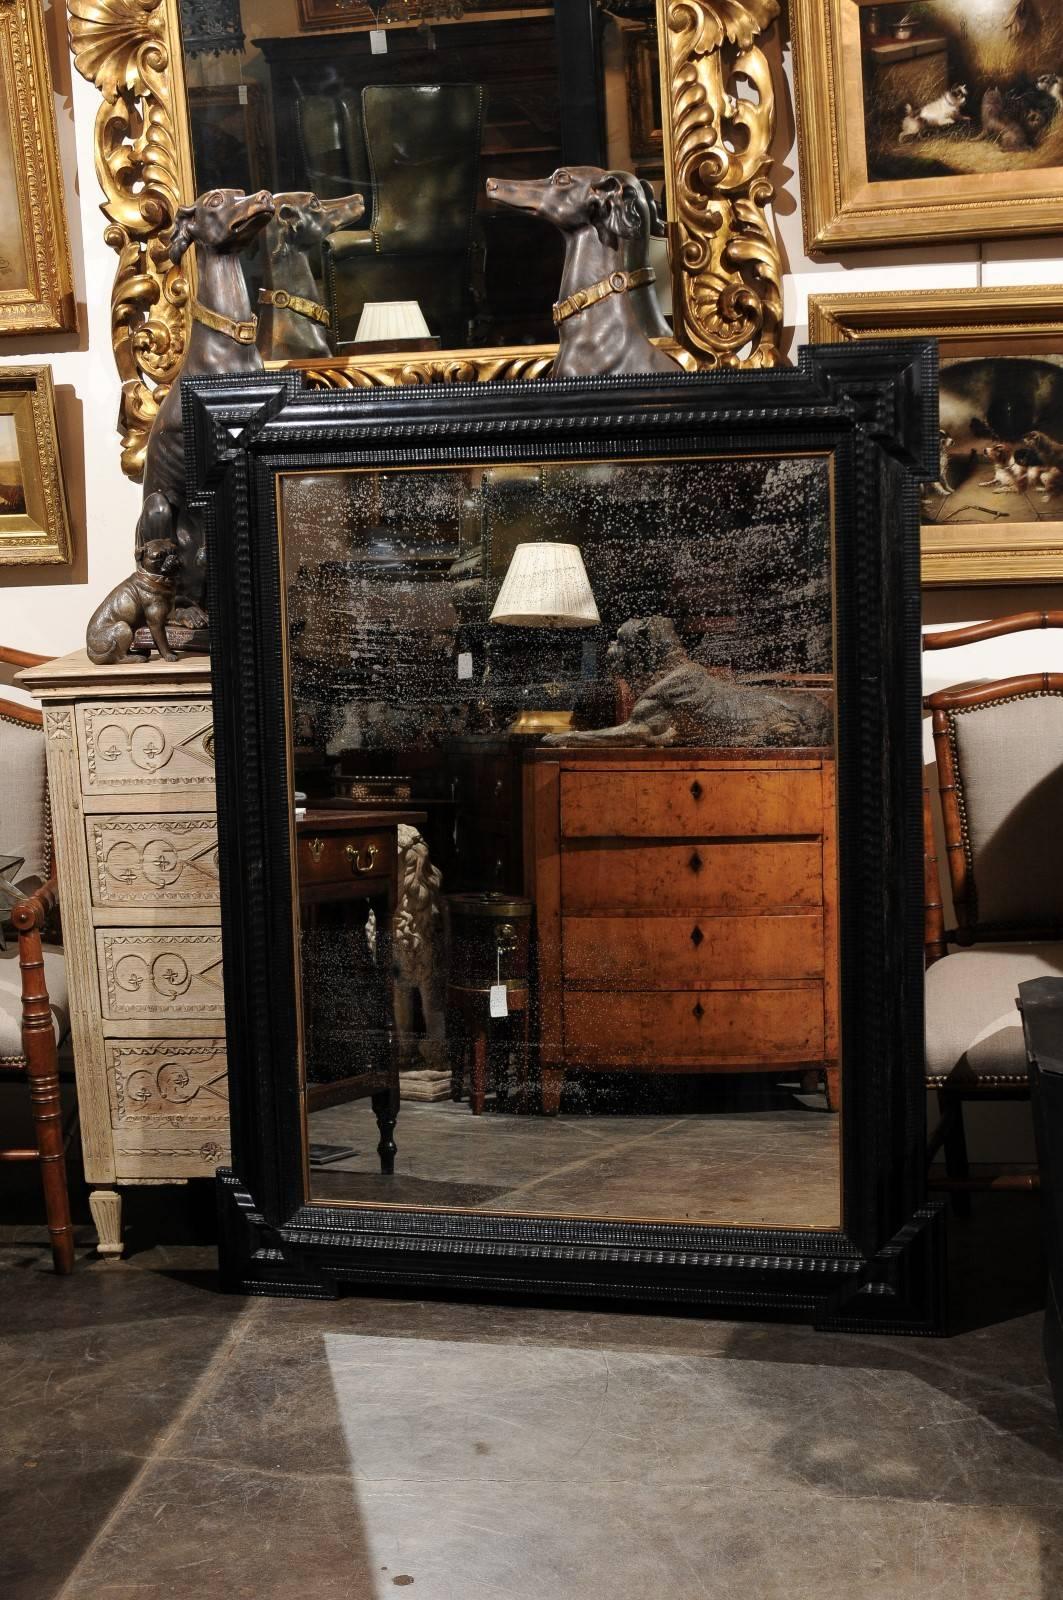 Large size ebonized and carved wooden Dutch mirror with distressed glass from the early 20th century. This oversized Dutch mirror features a linear black frame, typical of the northern Europe style and one could easily imagine such a mirror depicted